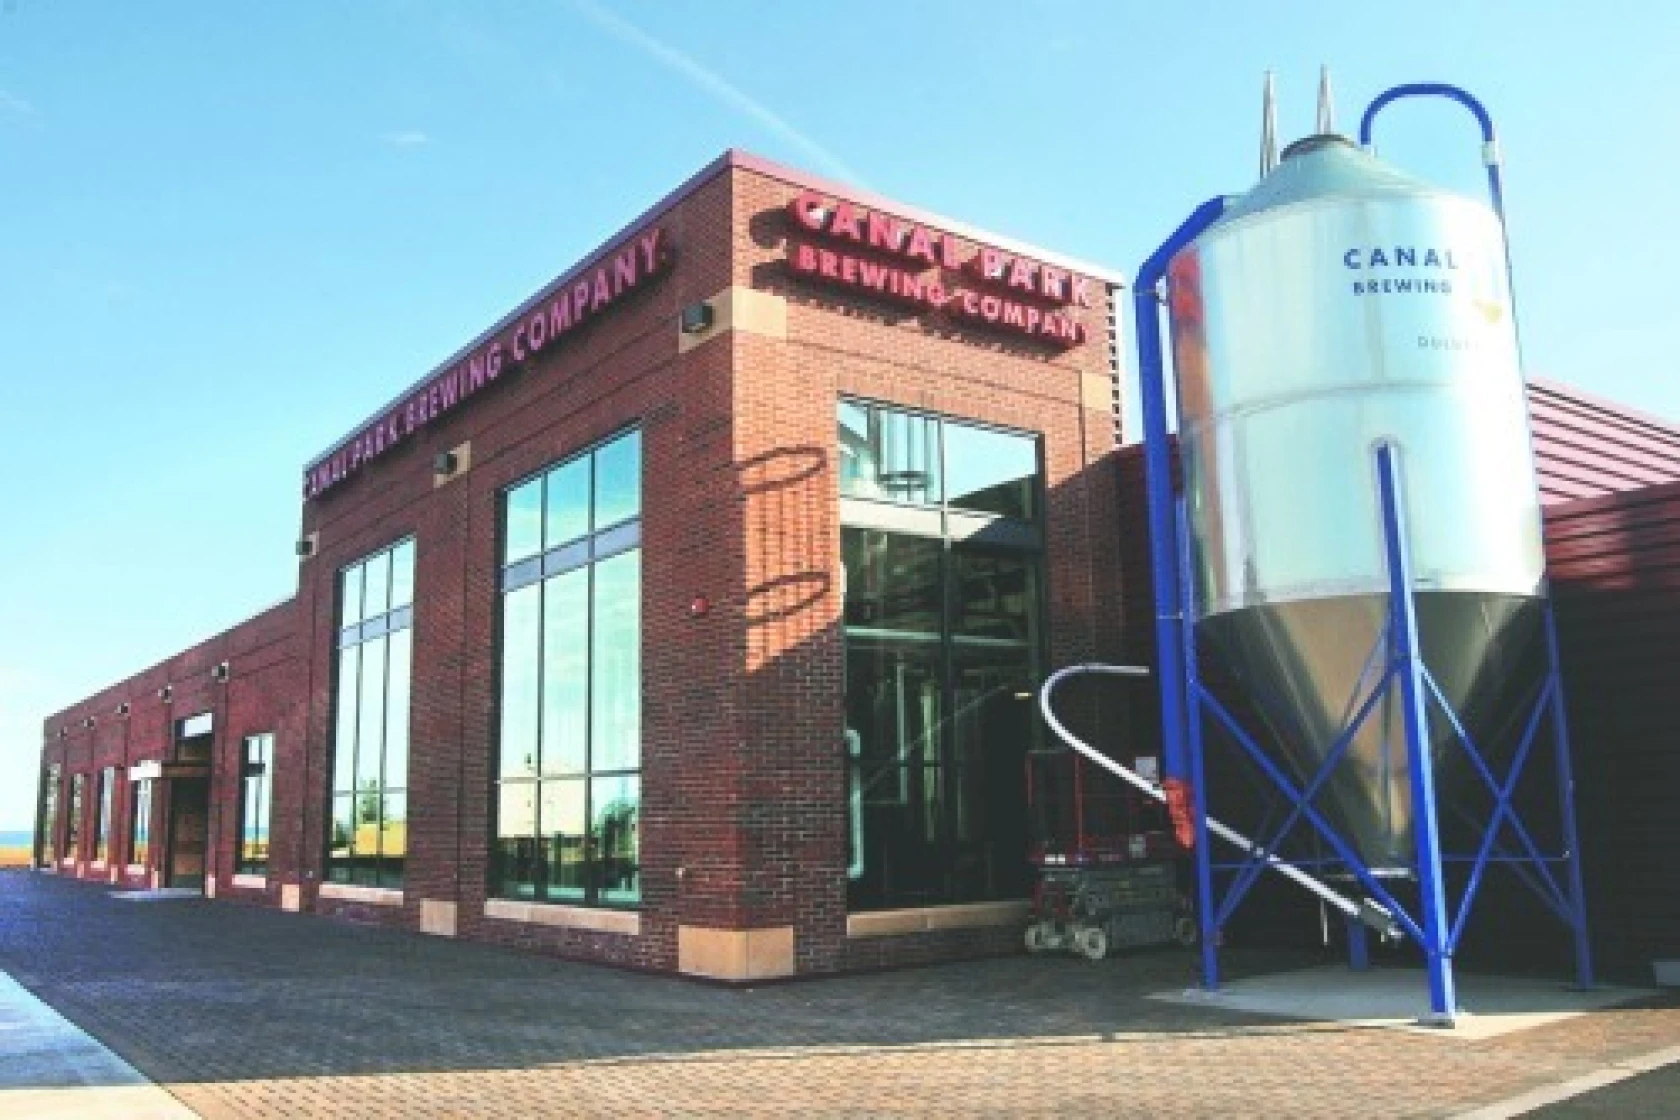 Canal Park Brewing Company is one of the best places to eat in Canal Park Duluth